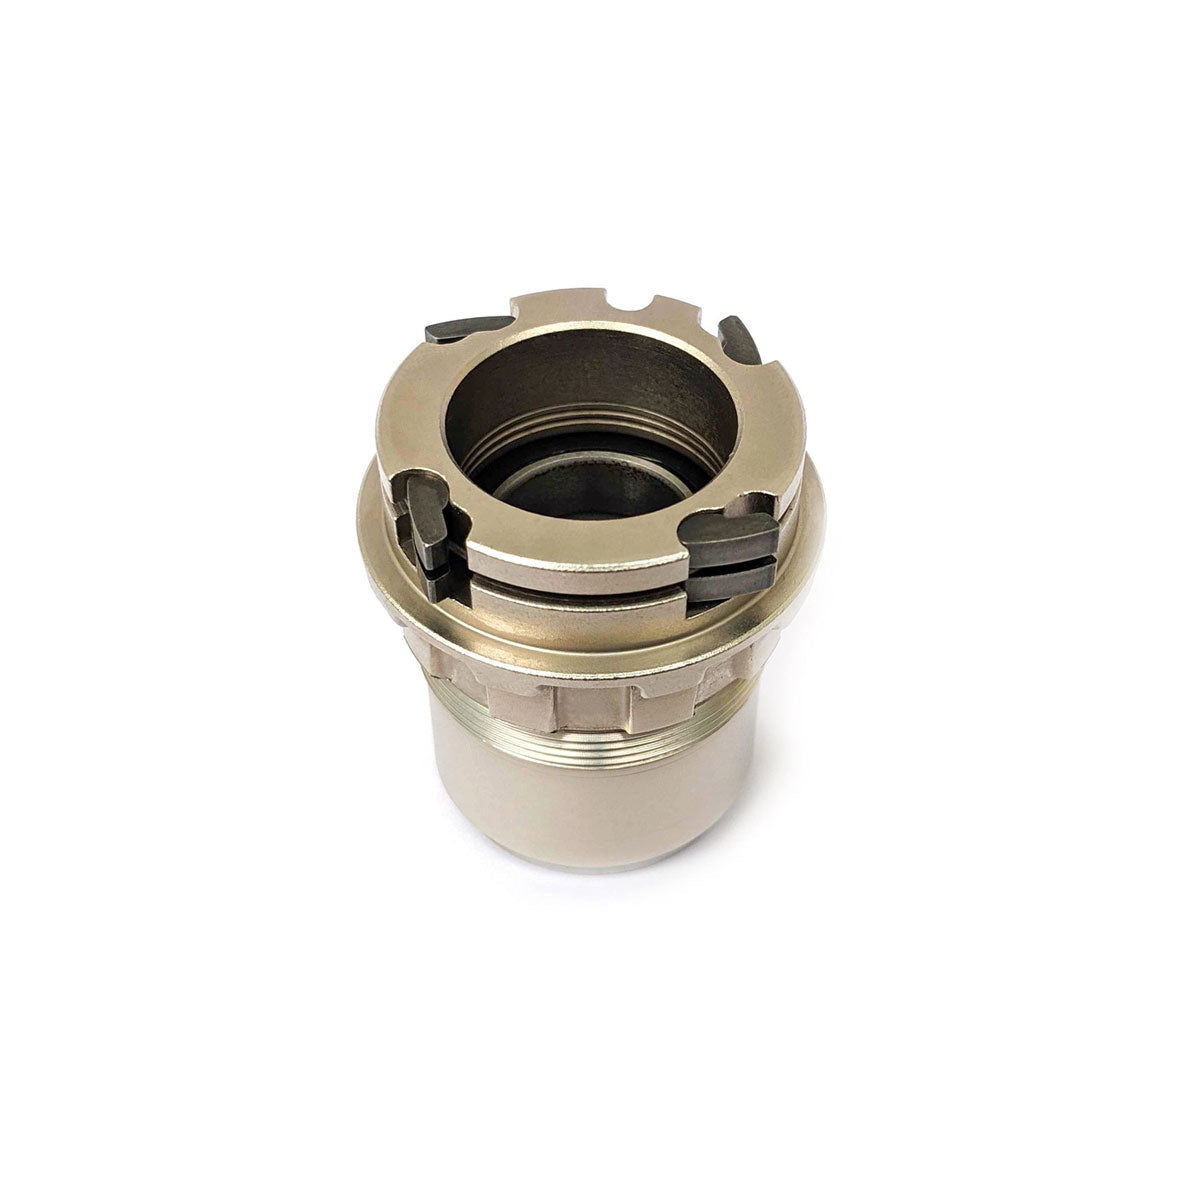 XDR/XD Freehub Body for KICKR and KICKR Core